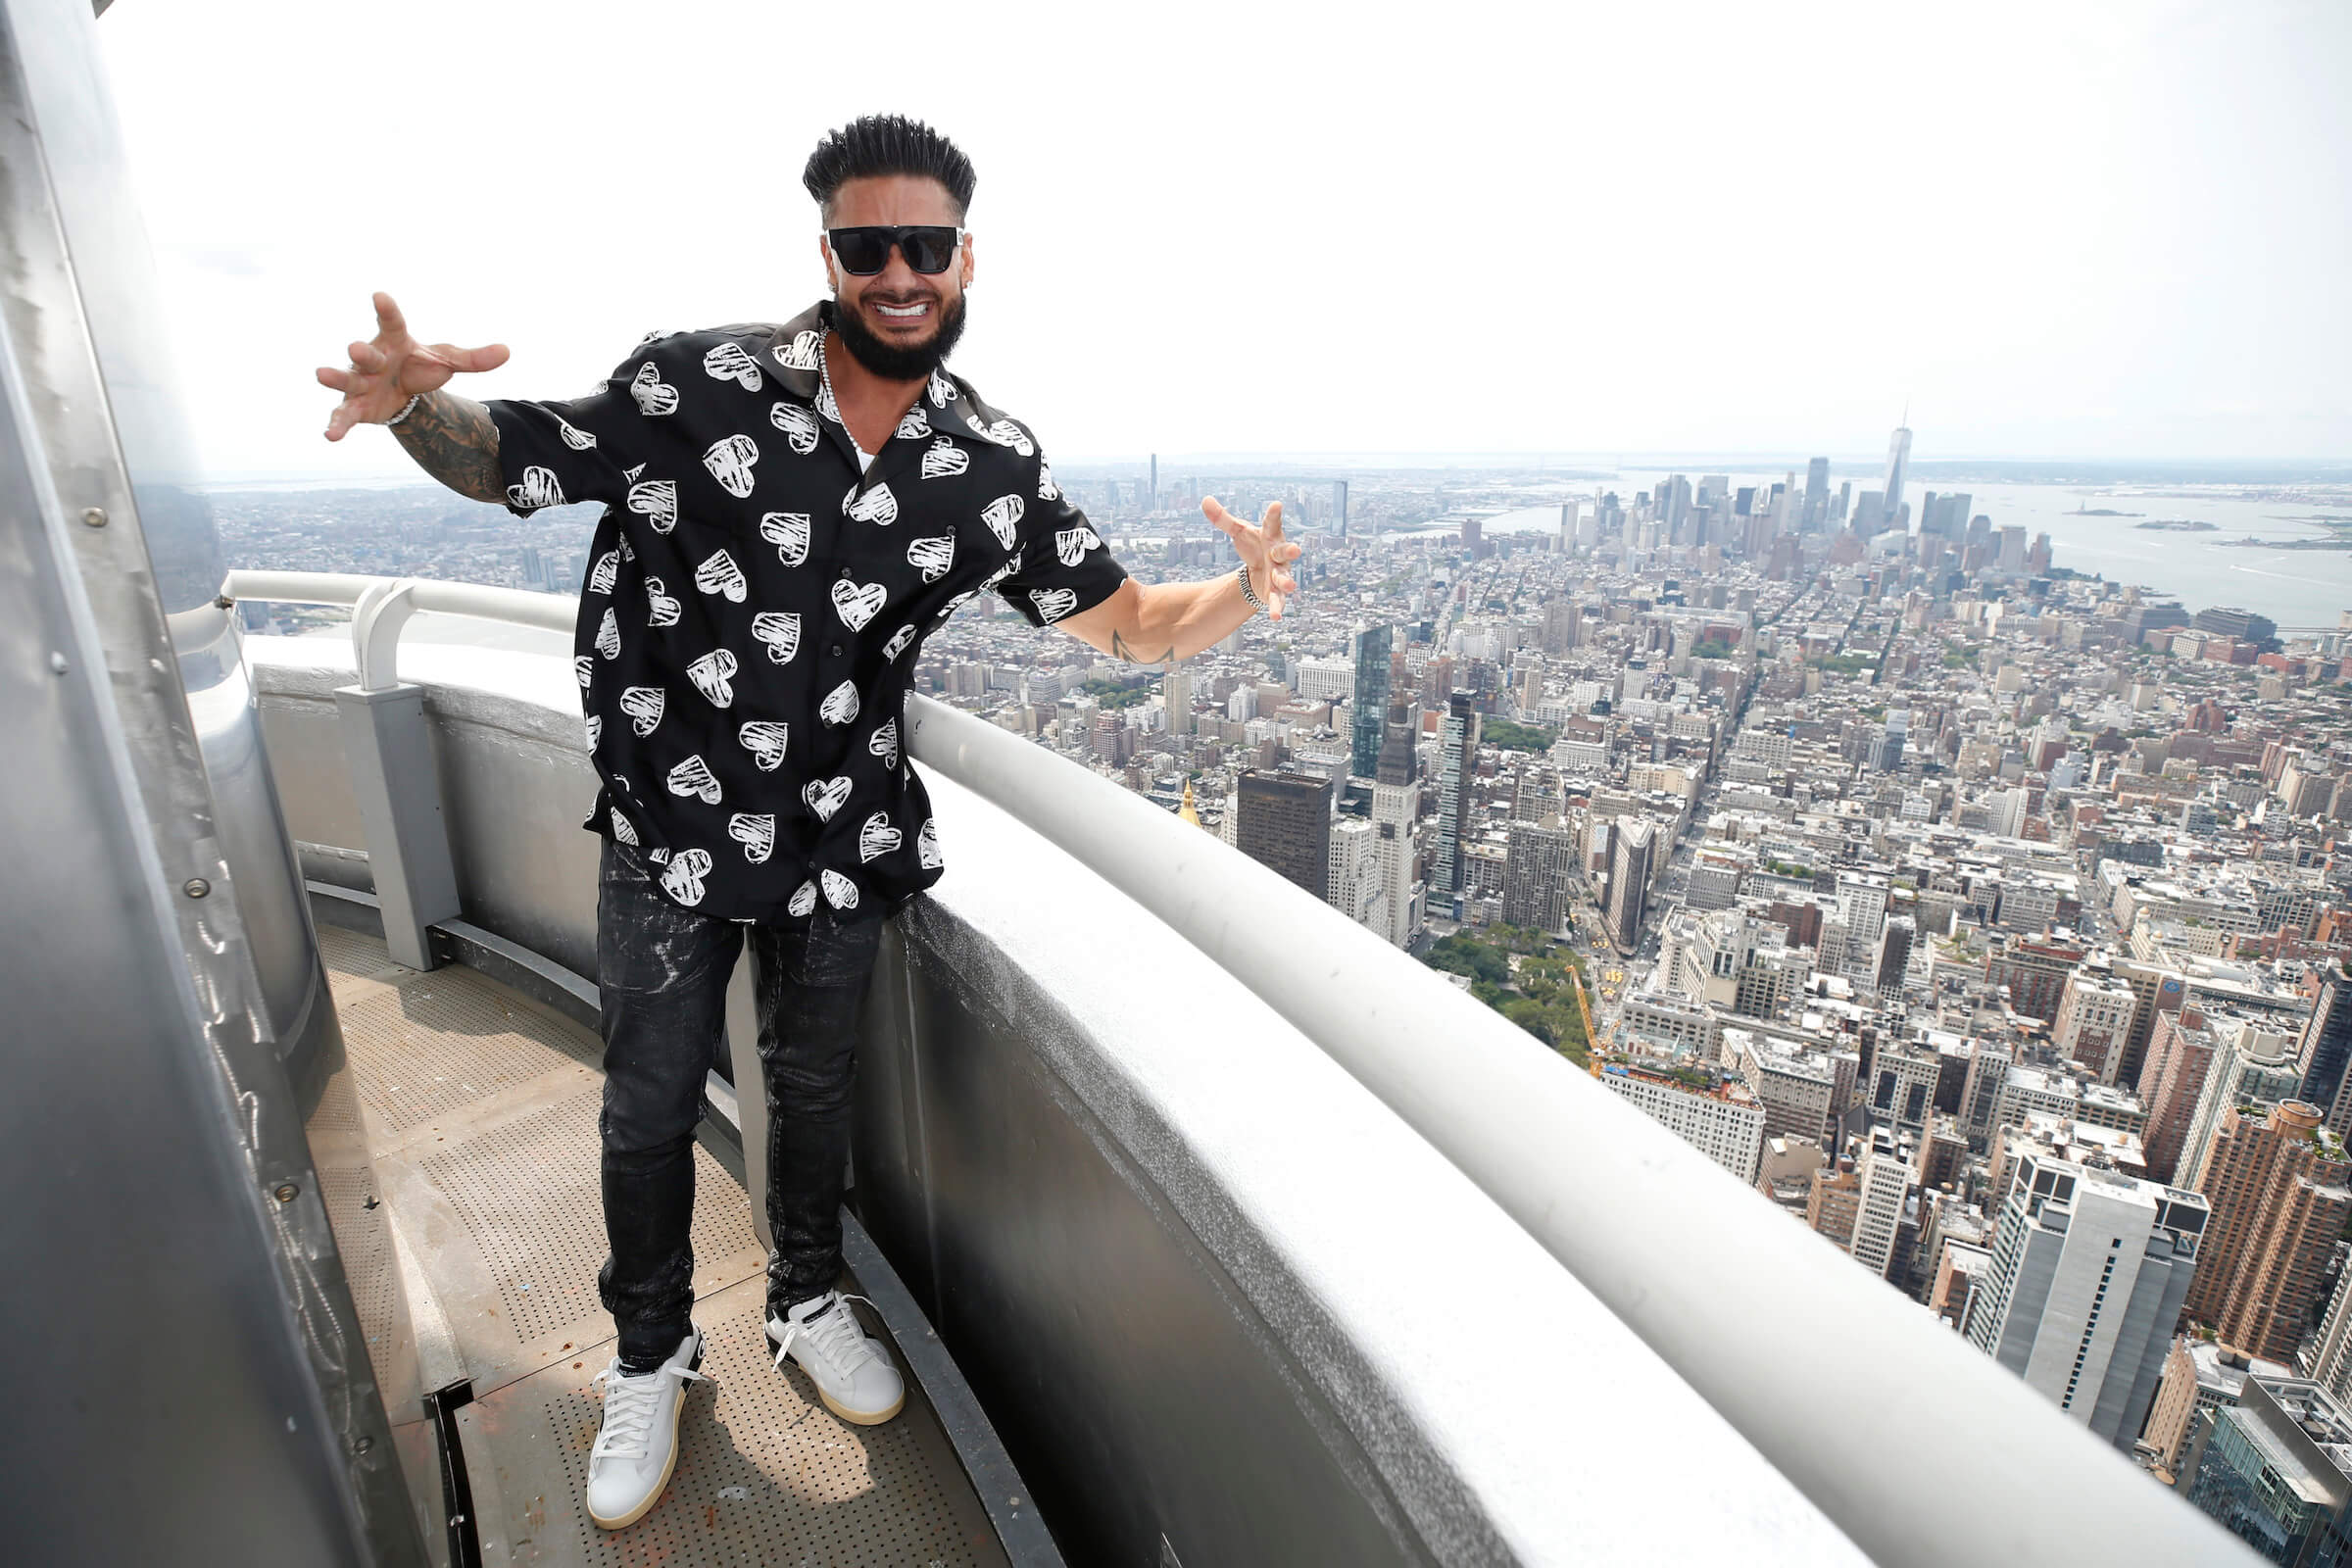 DJ Pauly D from 'Jersey Shore: Family Vacation' posing on the Empire State Building